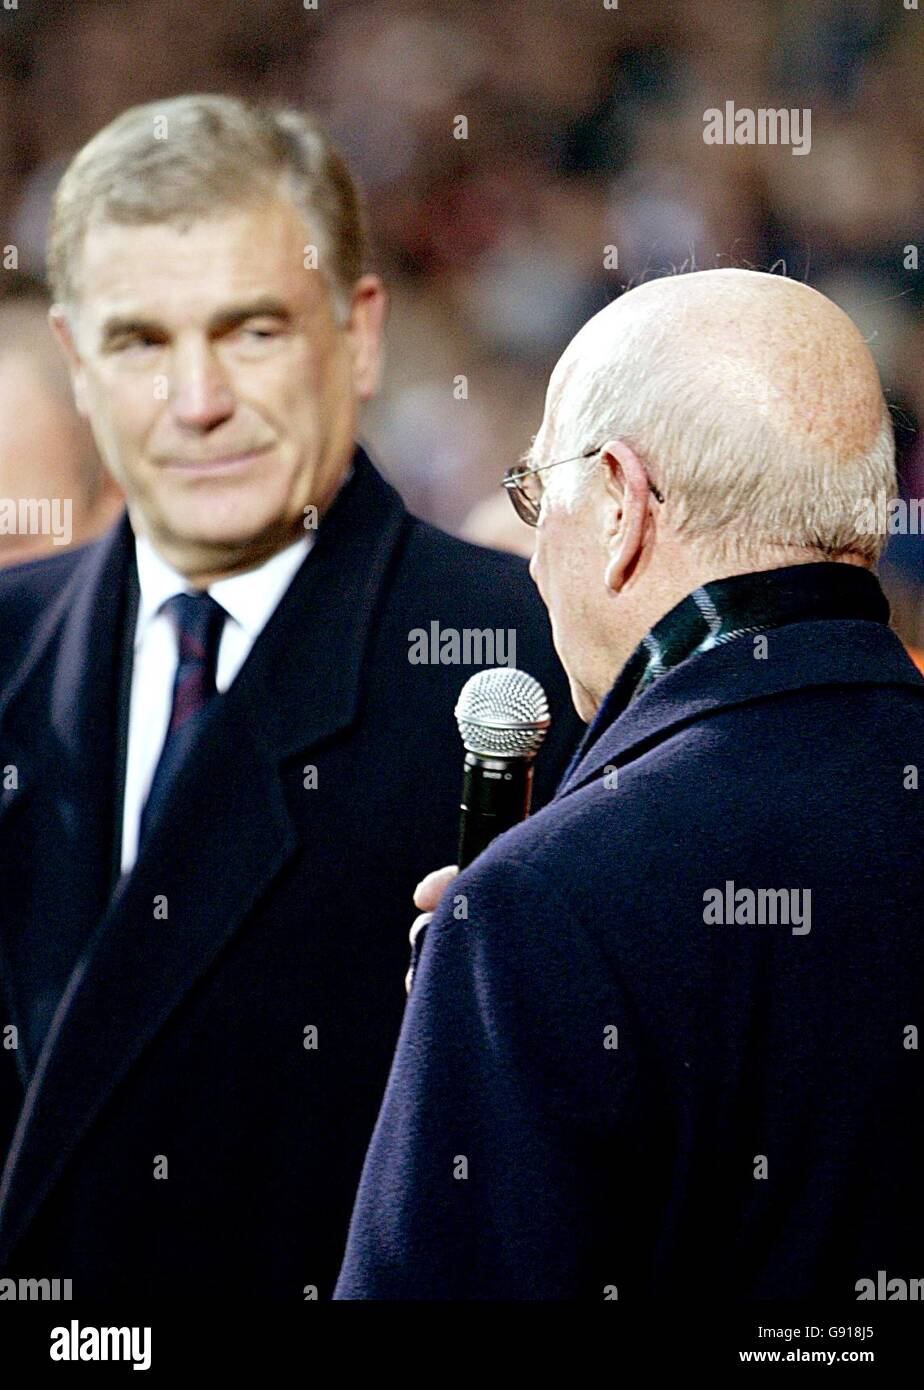 Soccer - FA Barclays Premiership - West Ham United v Manchester United - Upton Park. Manchester United's director Sir Bobby Charlton and Sir Trevor Brooking remeber George Best before the match Stock Photo